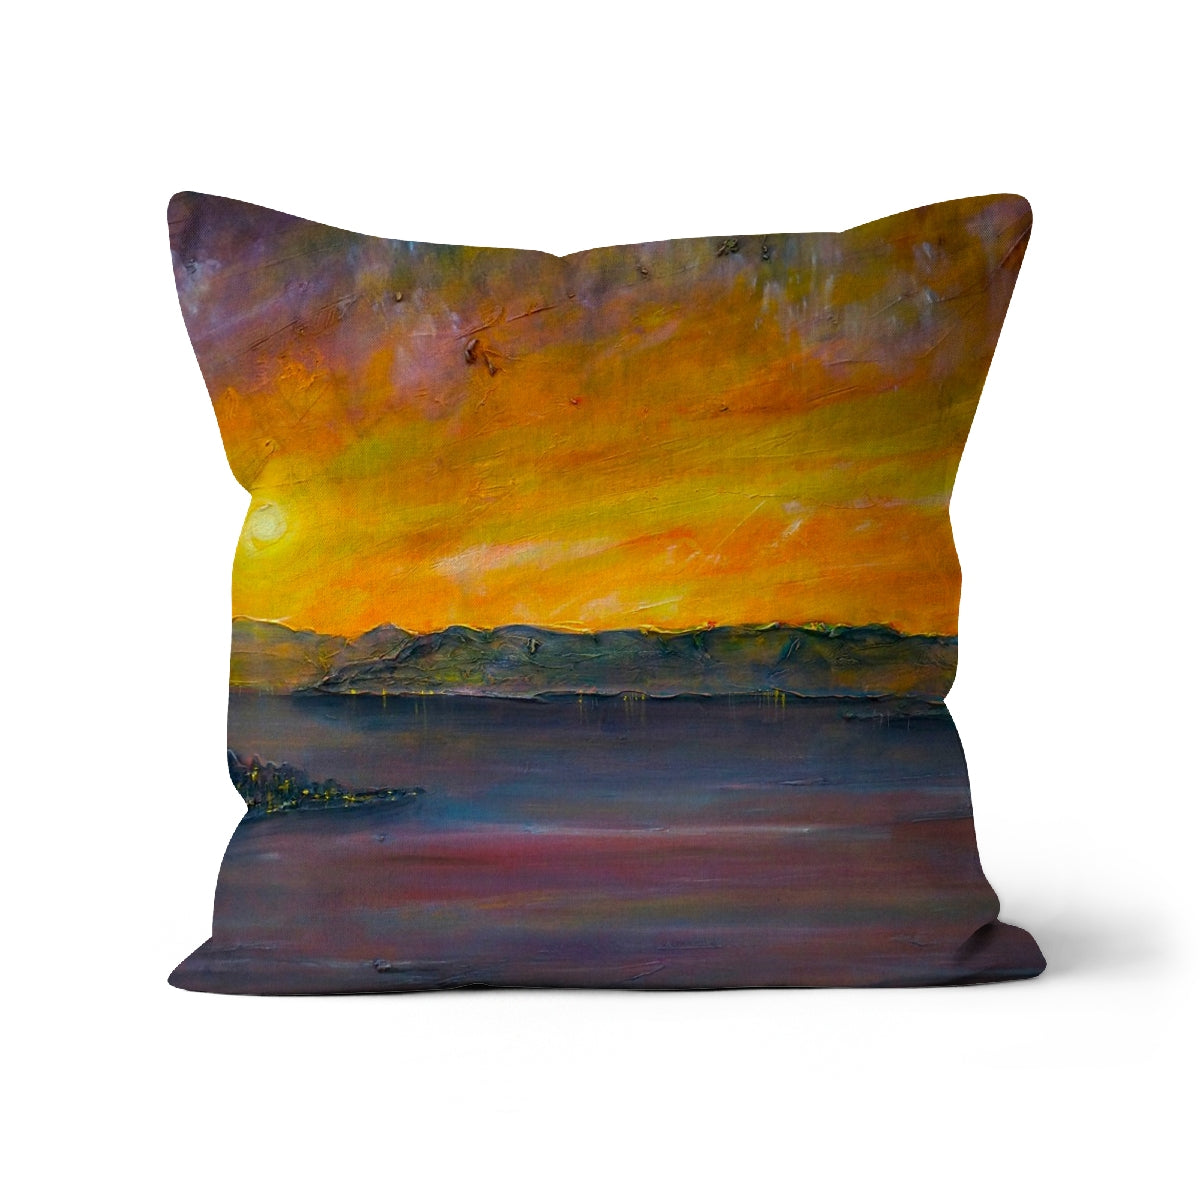 Sunset Over Gourock Art Gifts Cushion-Cushions-River Clyde Art Gallery-Linen-18"x18"-Paintings, Prints, Homeware, Art Gifts From Scotland By Scottish Artist Kevin Hunter